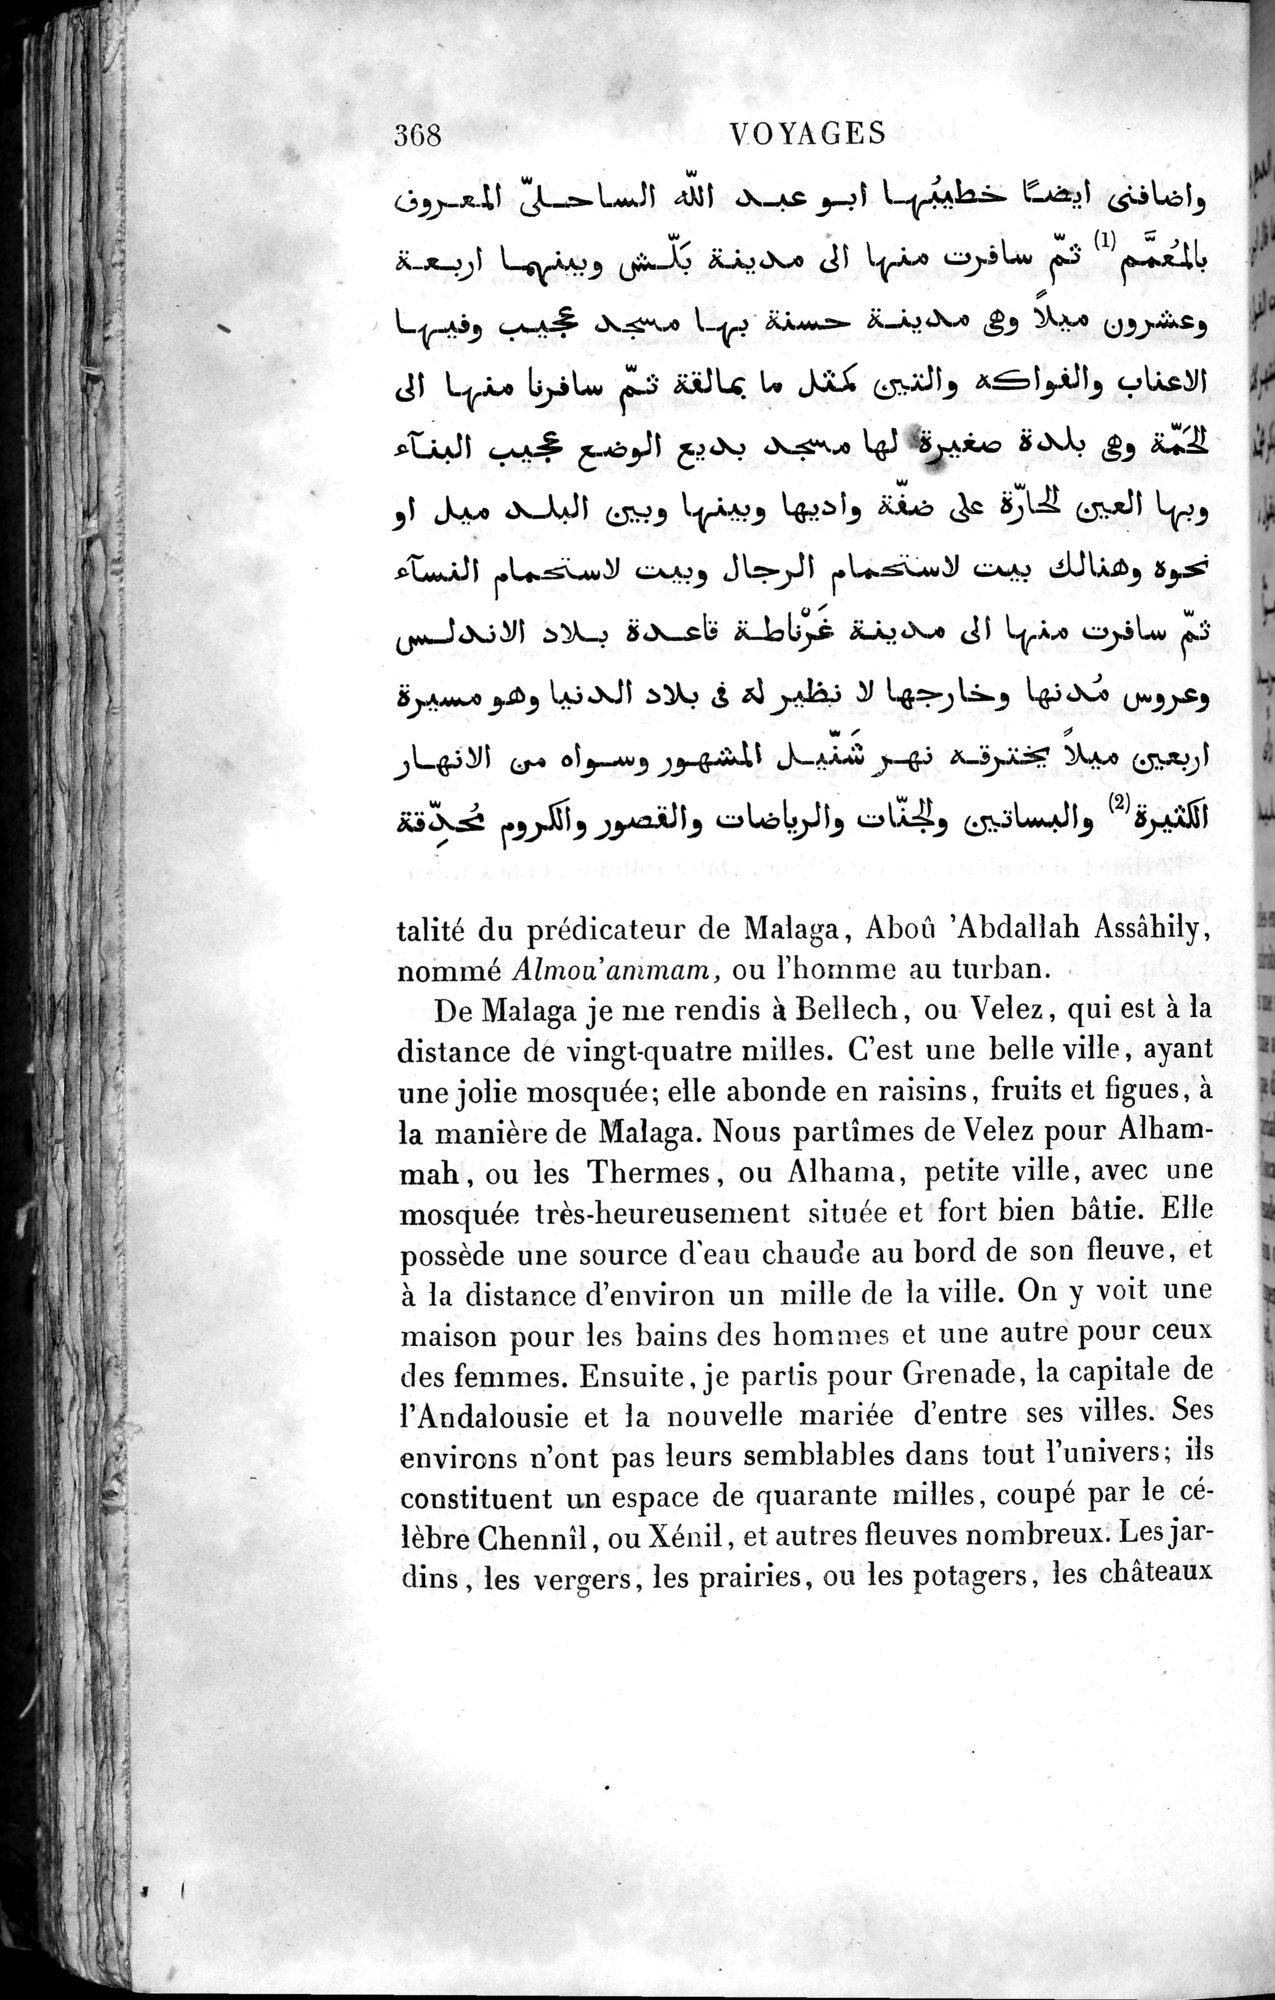 Voyages d'Ibn Batoutah : vol.4 / Page 380 (Grayscale High Resolution Image)